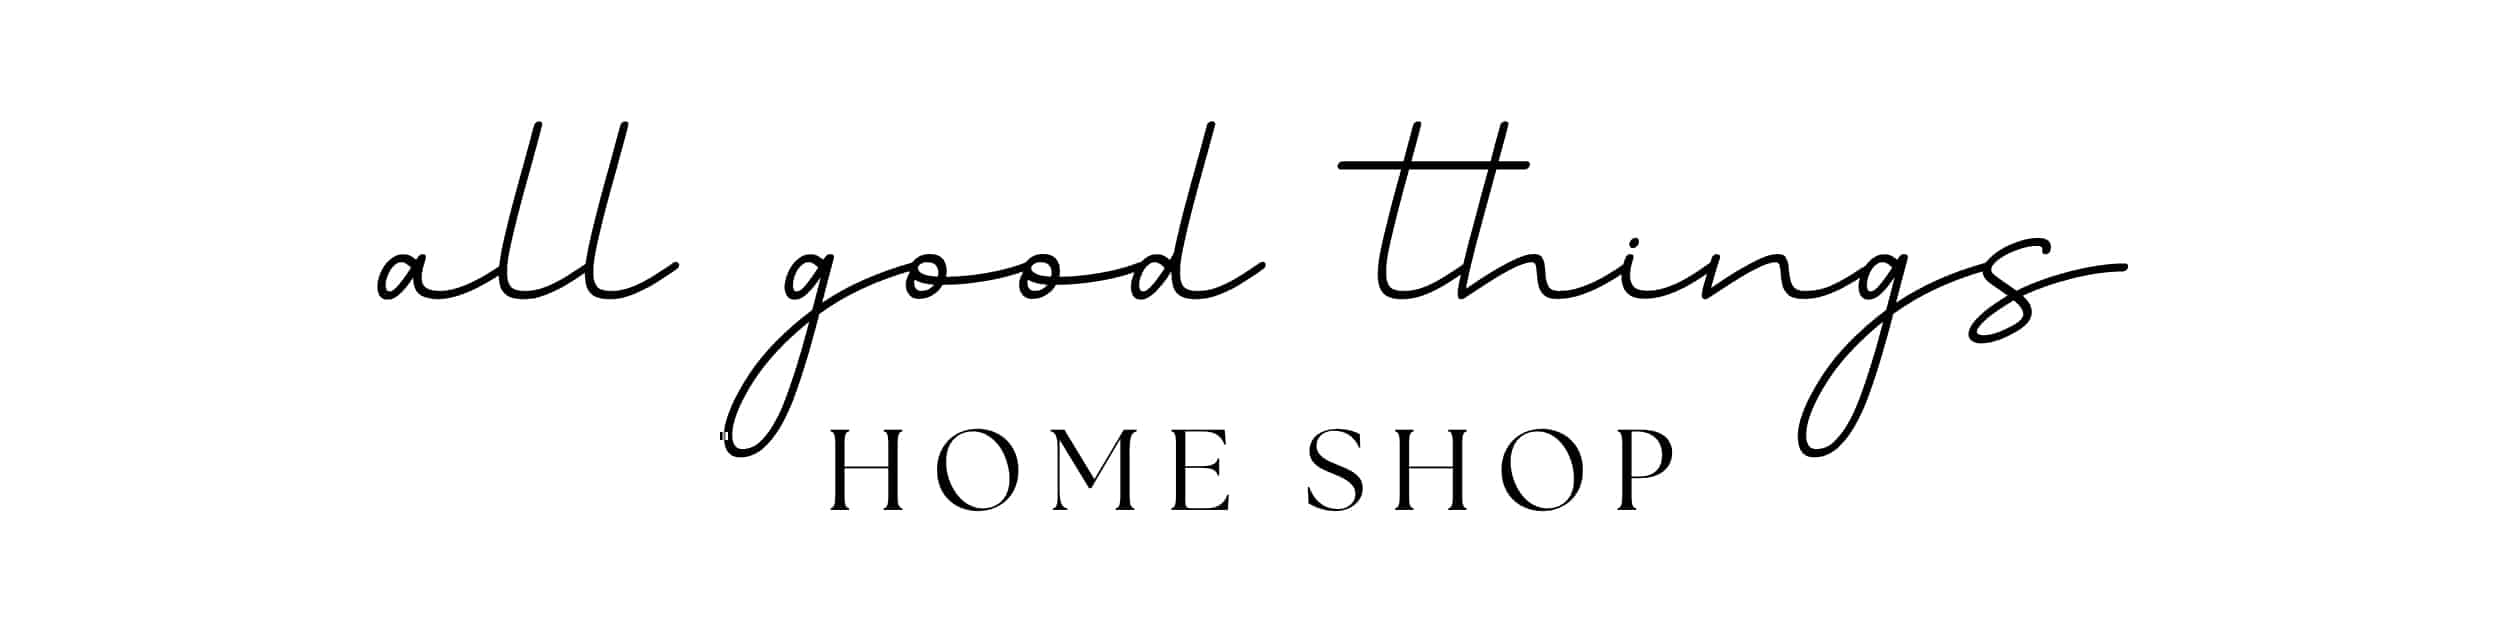 Office + Creative Spaces: All Good Things Home Shop